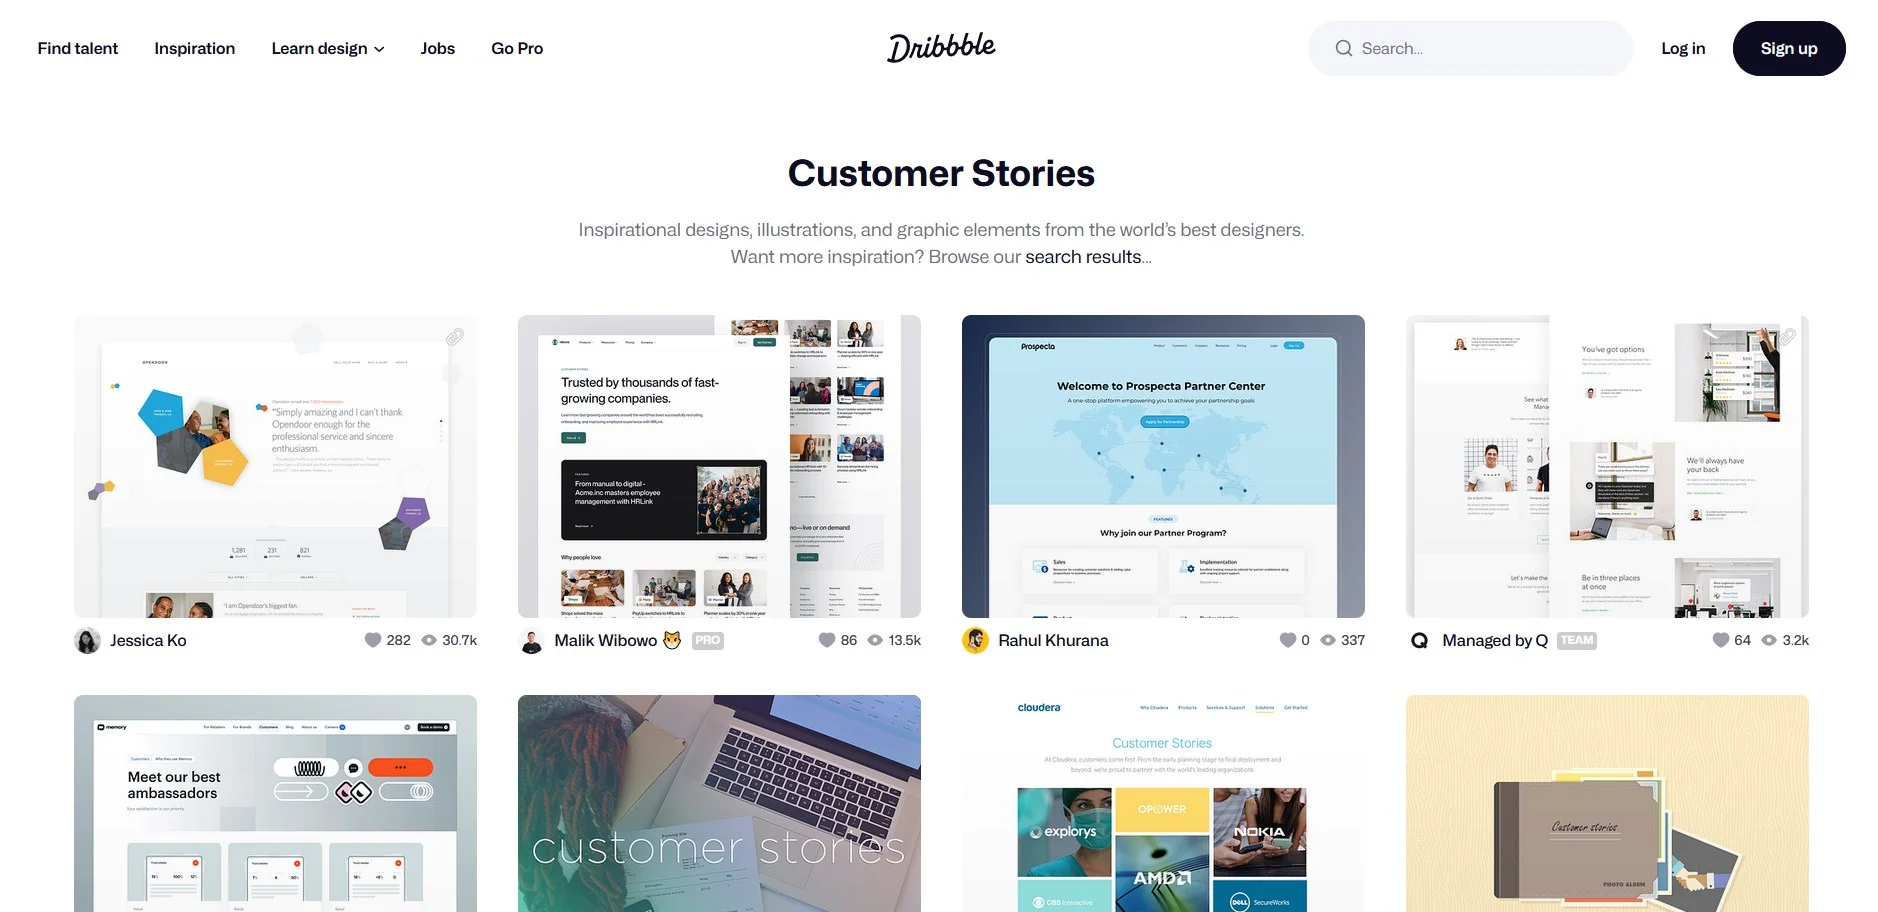 Success stories page